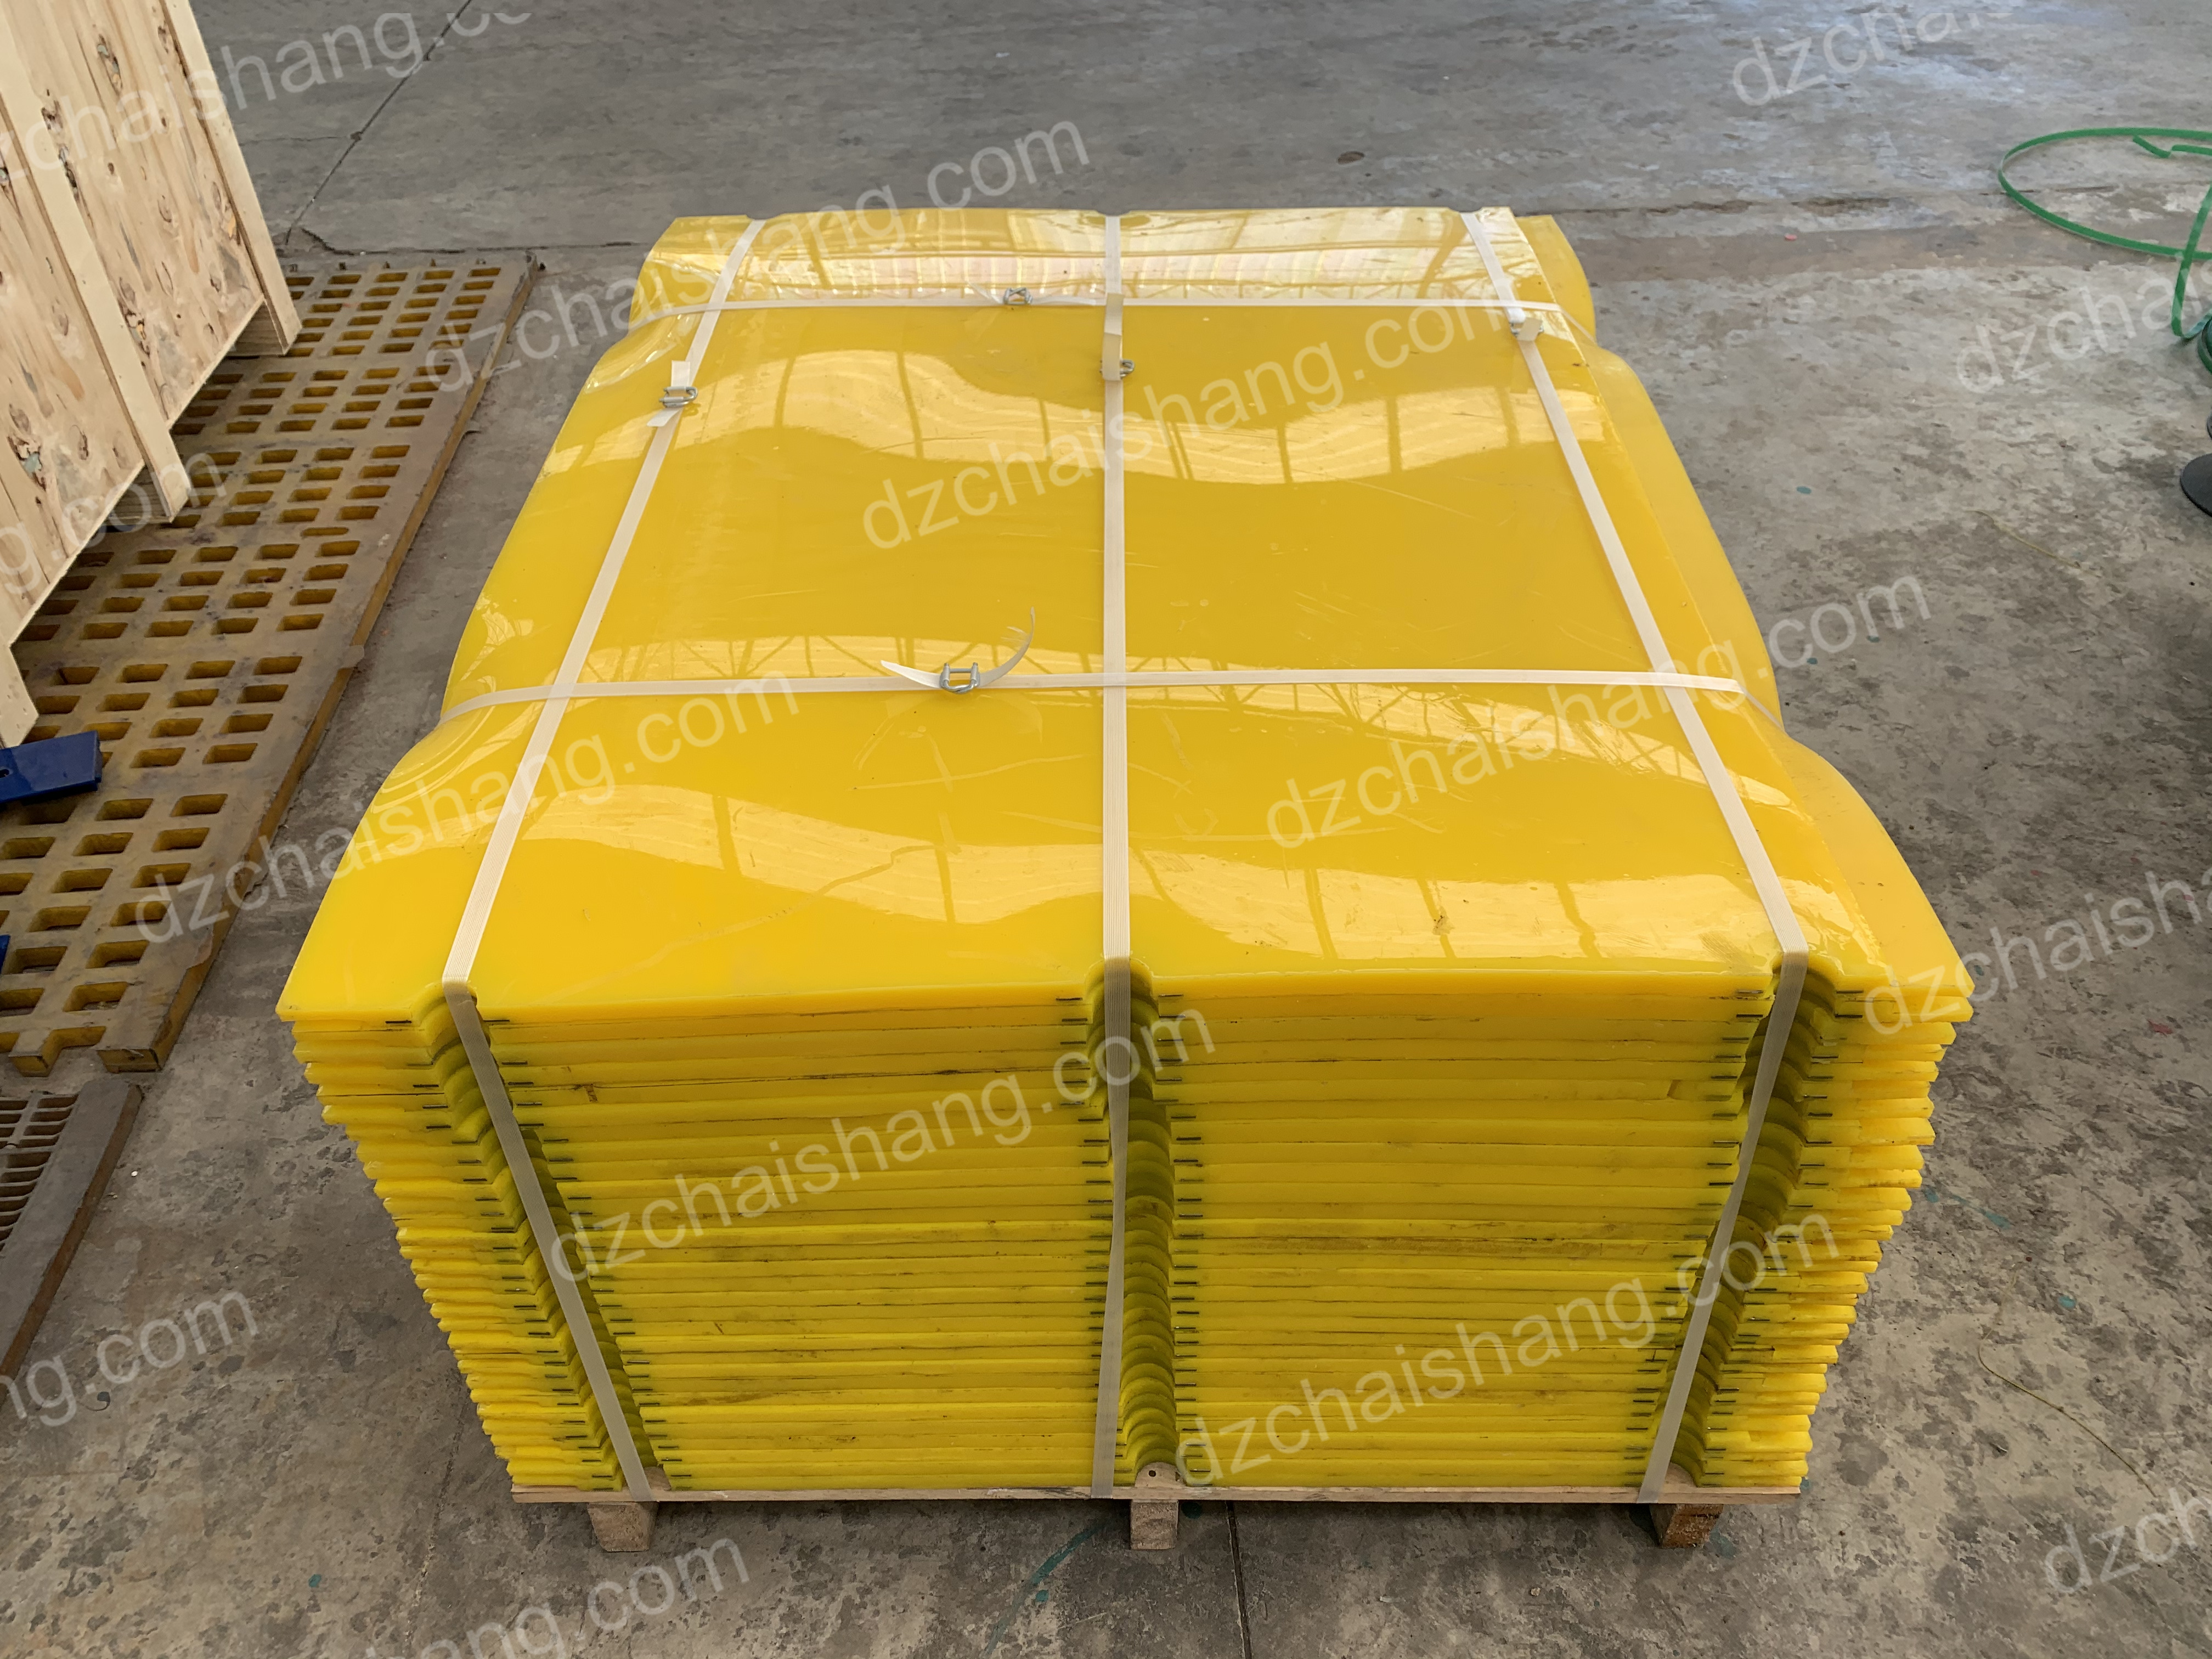 China Polyurethane tensioned plate,pu screen with sound,polyurethane screen 0.5-CHAISHANG | Polyurethane Screen,Rubber Screen PanelsHigh frequency screen mesh,Belt Cleaner,Flotation Cell